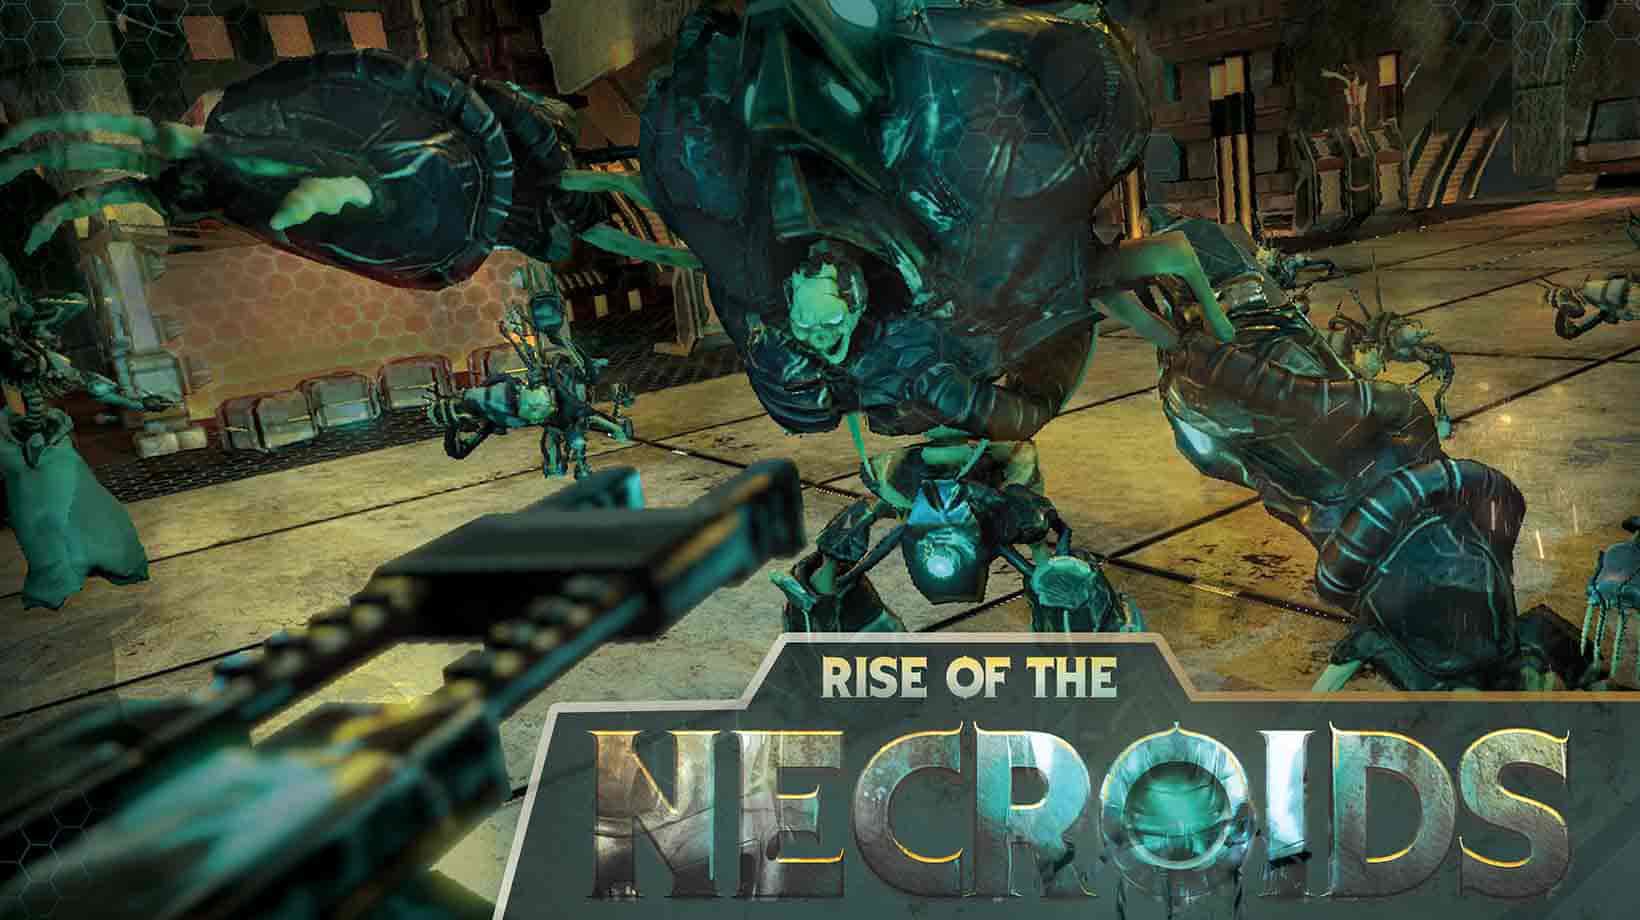 Rise of the necroids